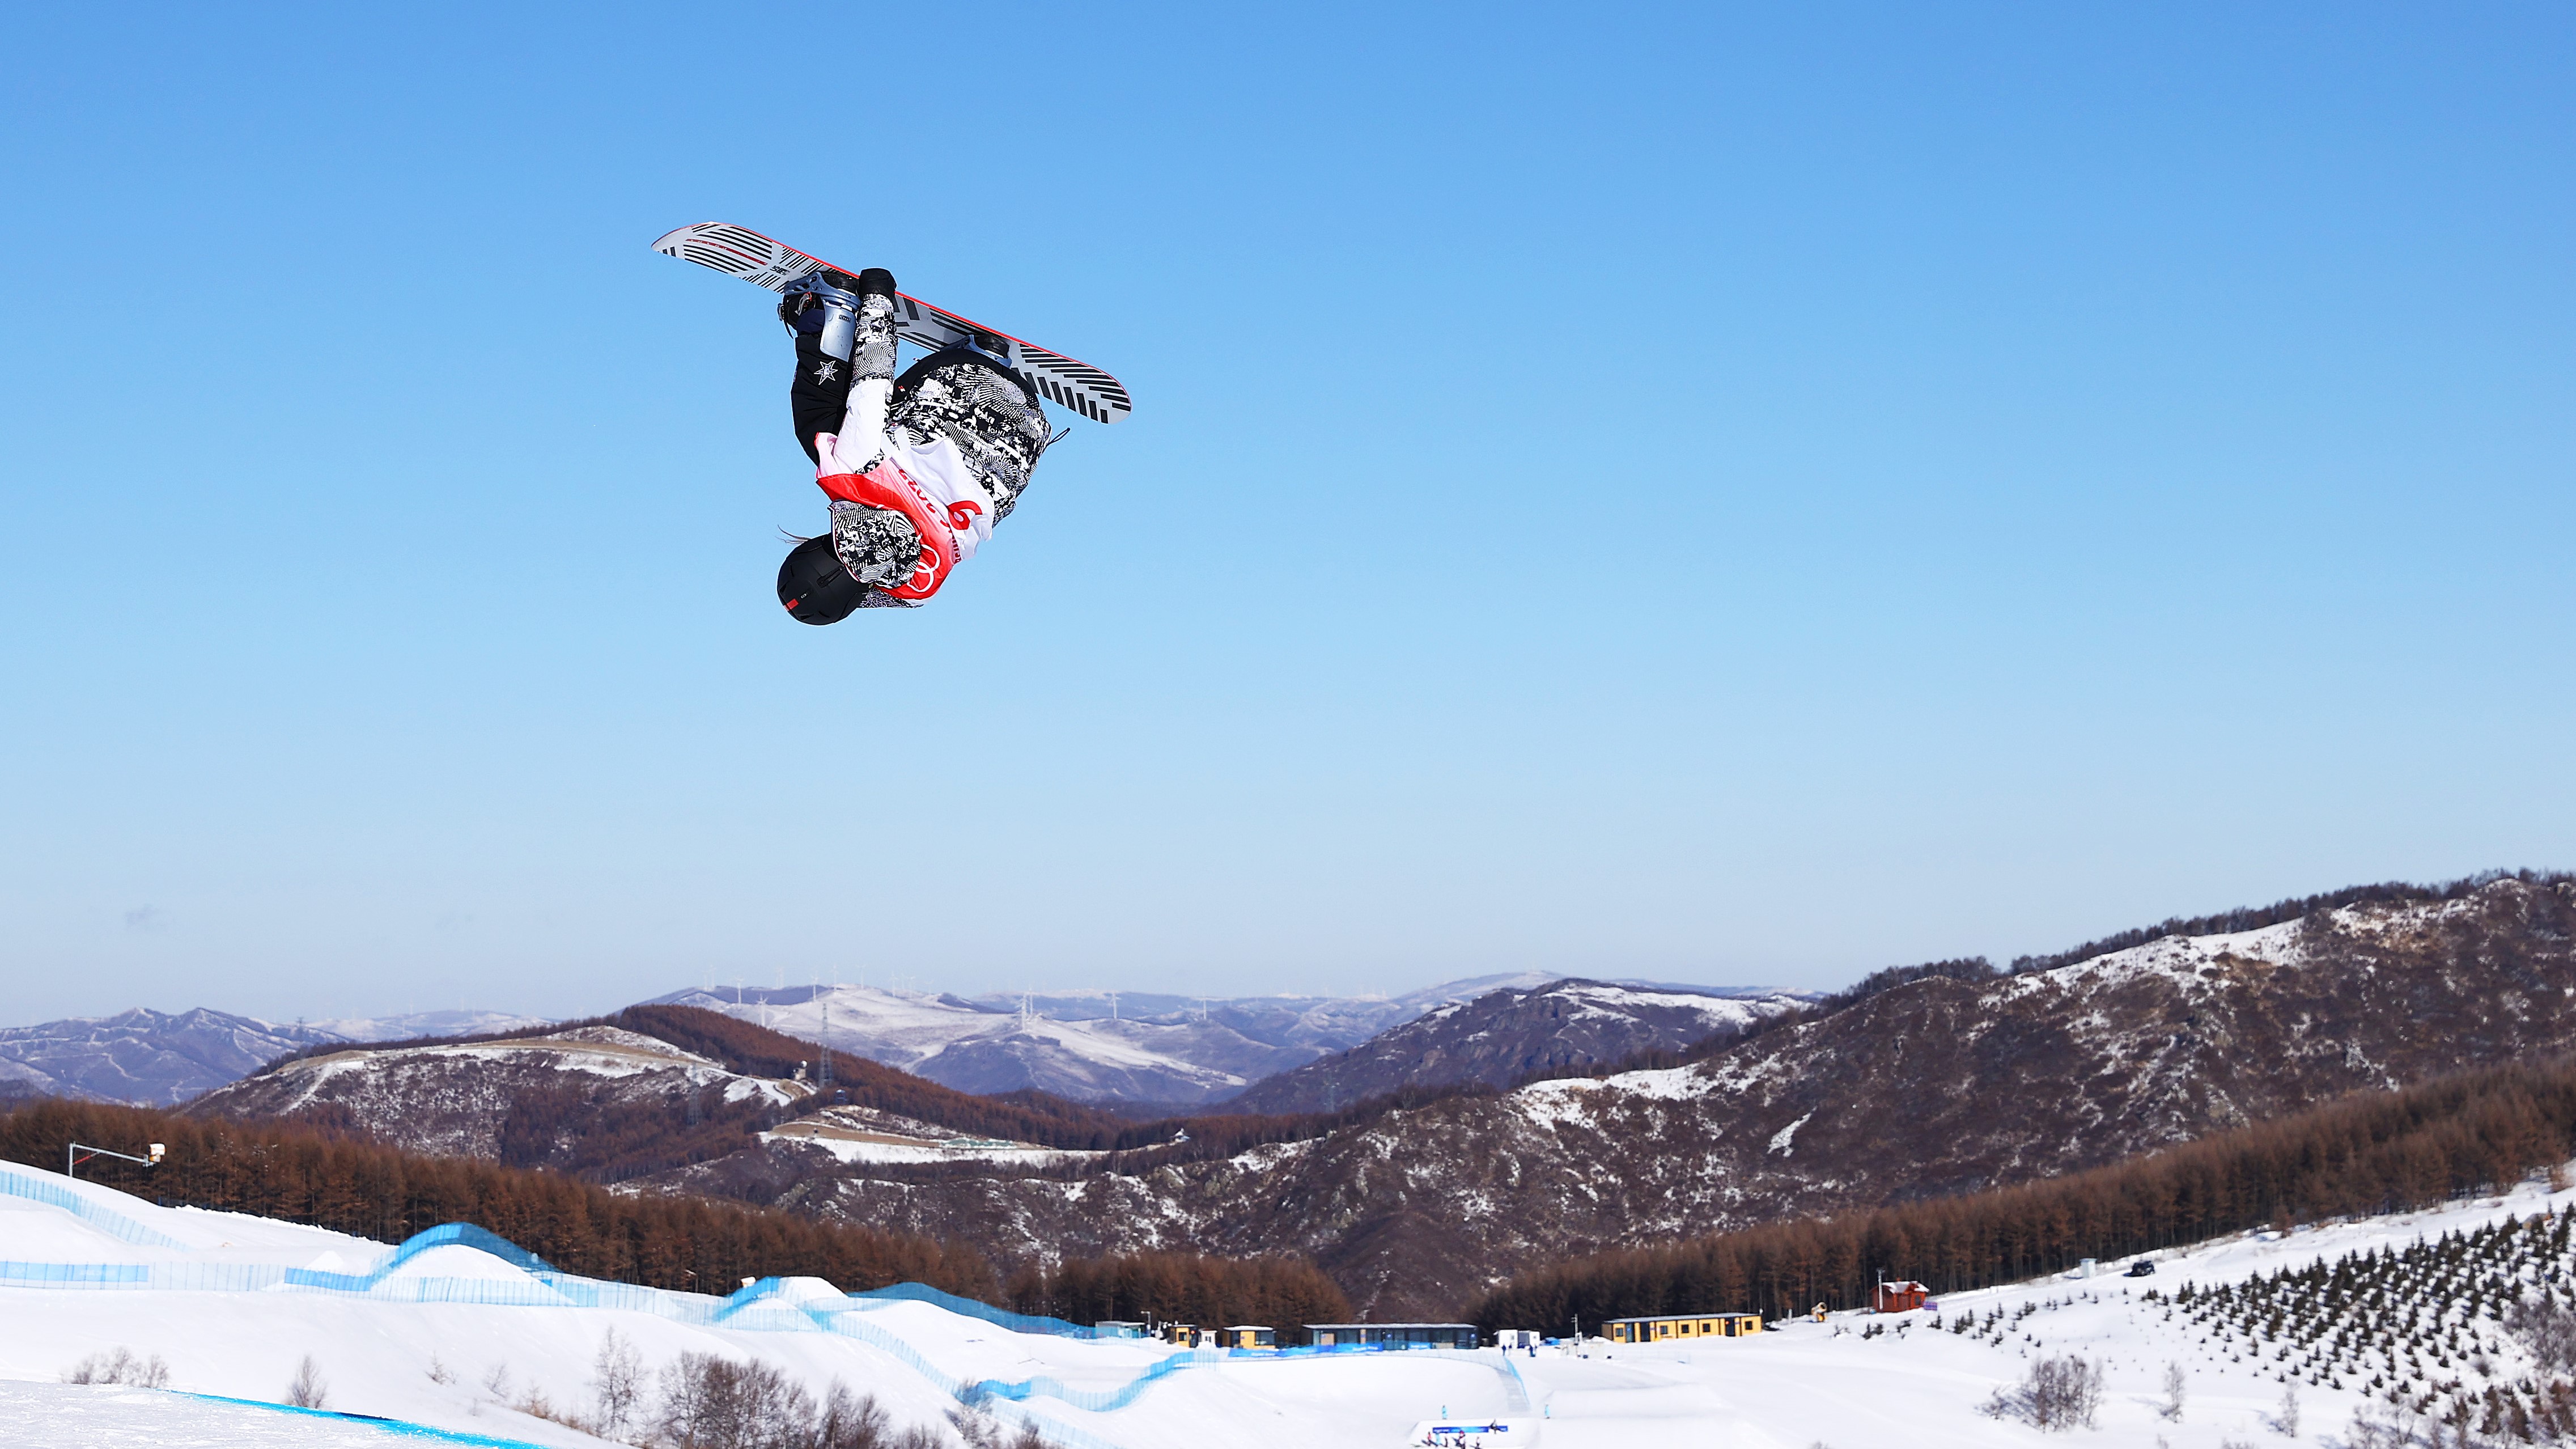 USAs Julia Marino Takes Silver In Womens Snowboarding Slopestyle Event at 2022 Winter Olympics